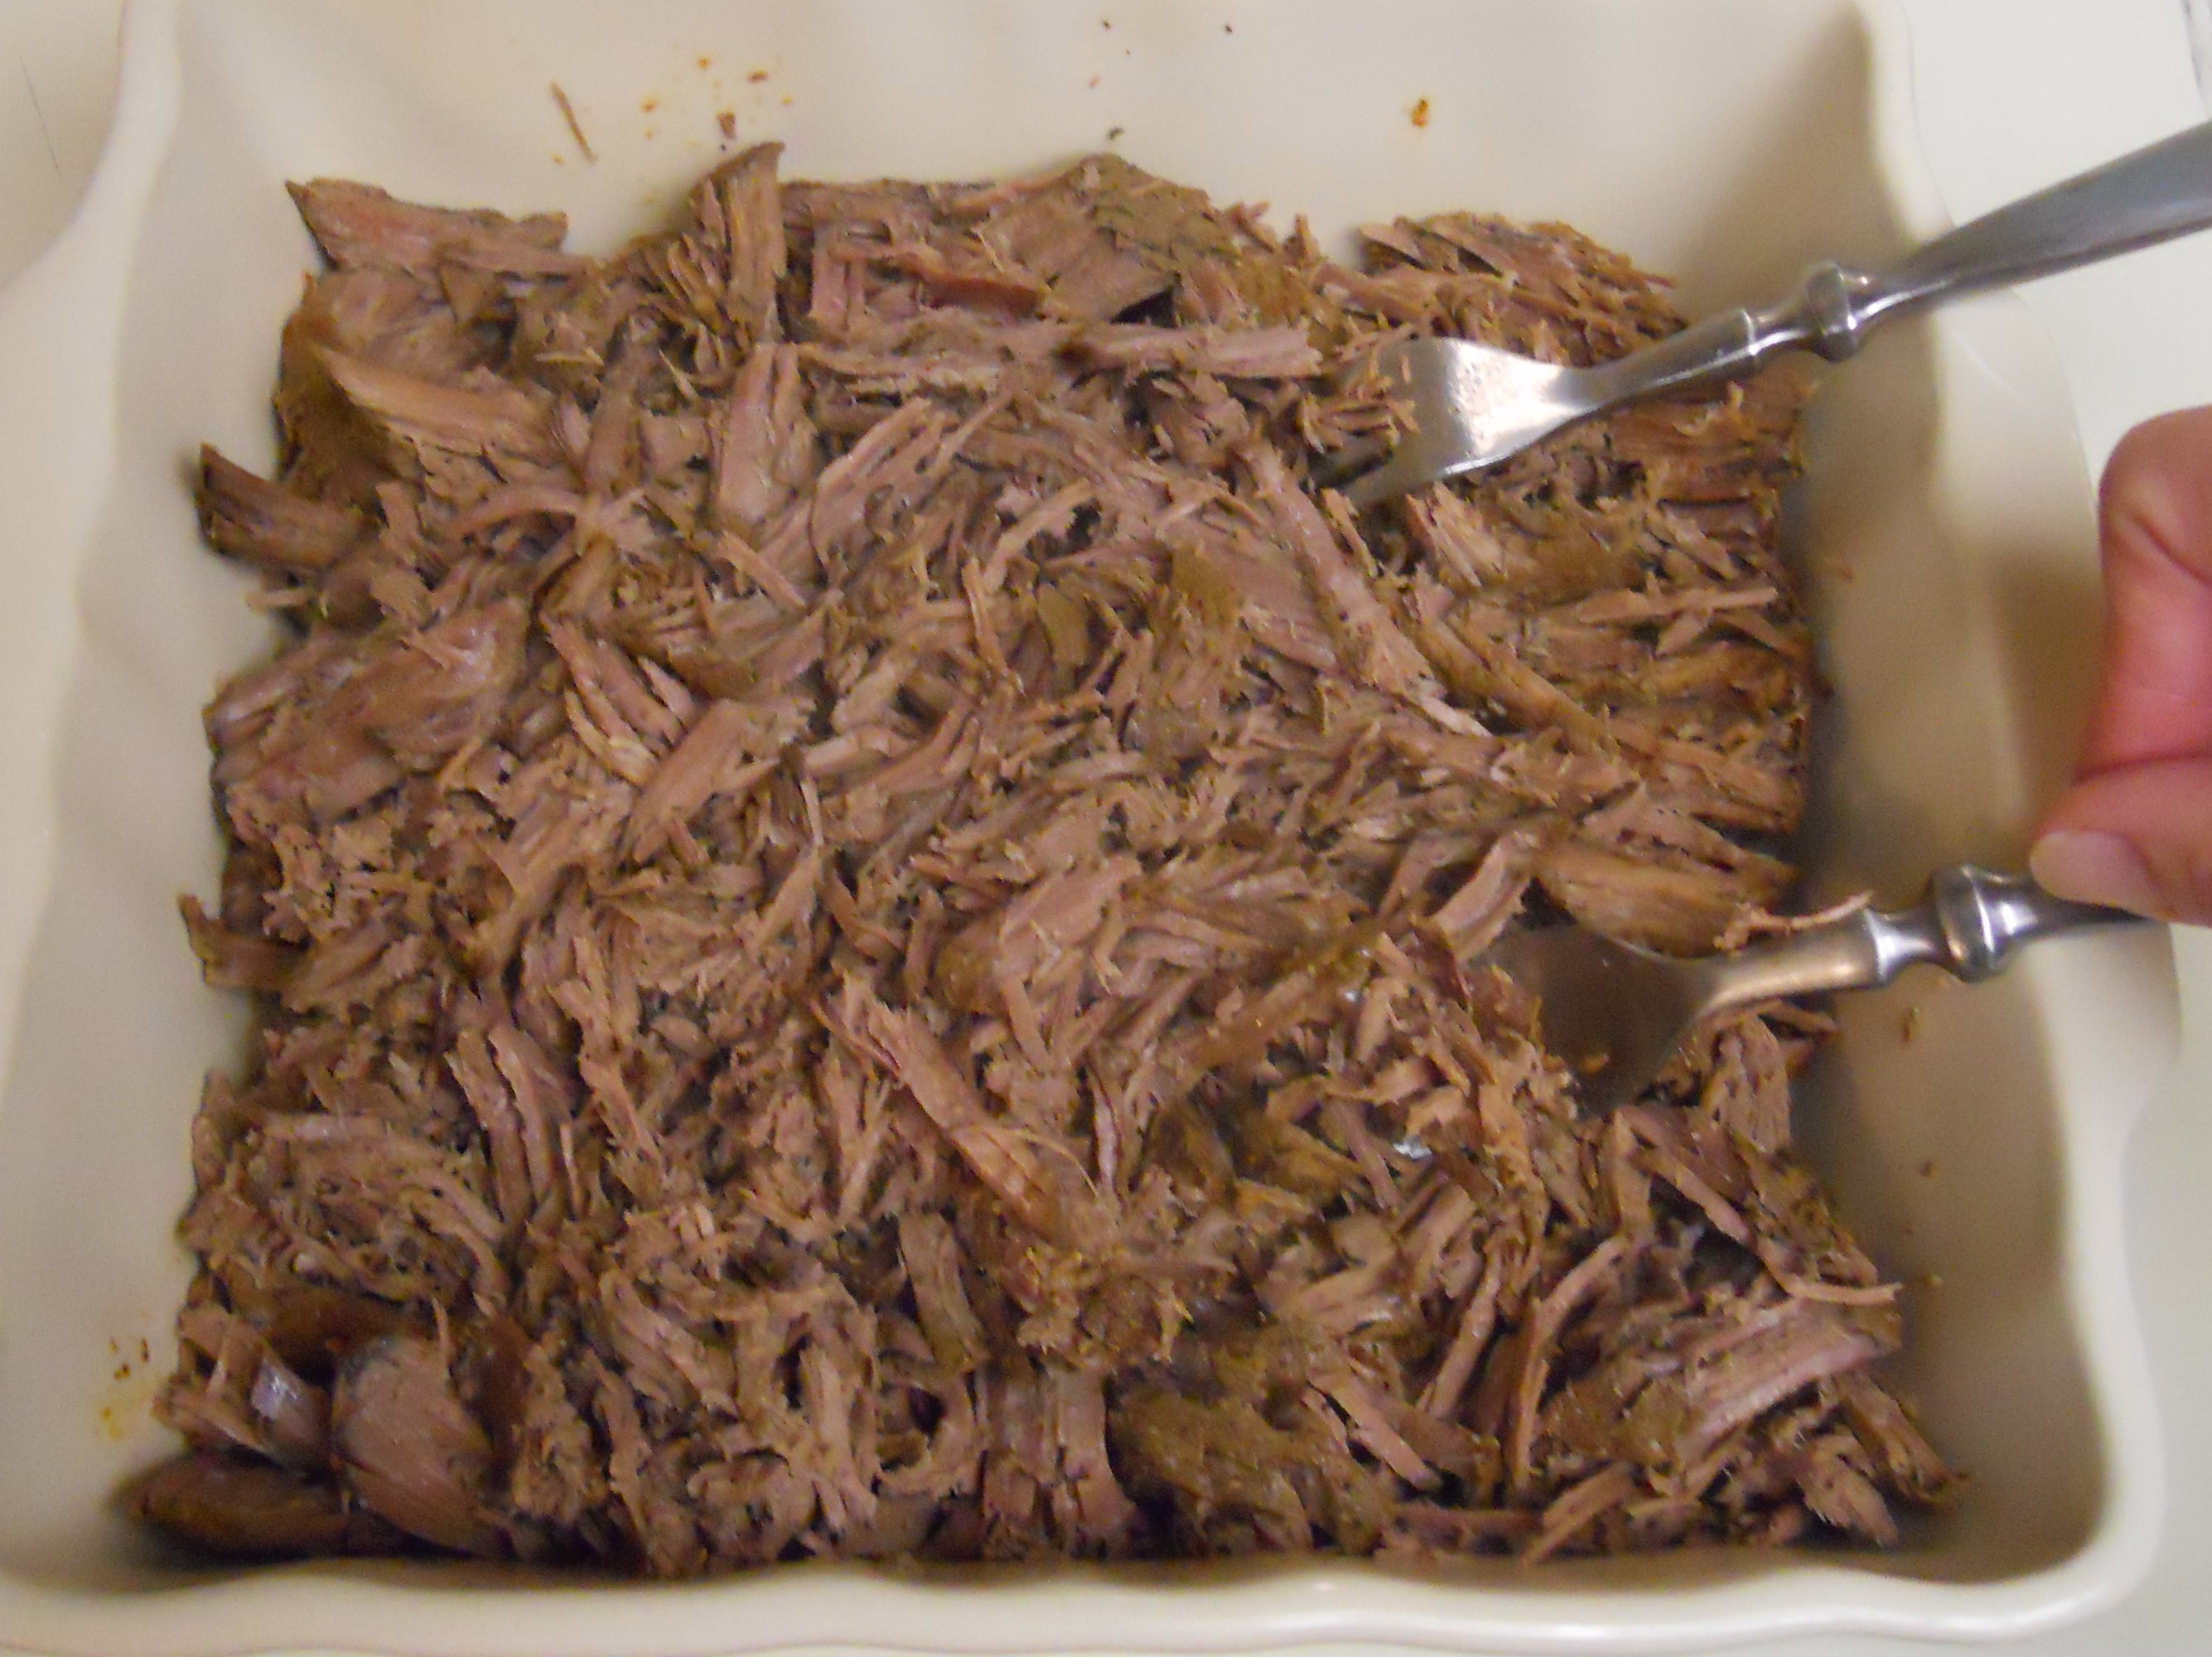 Nibbles Of Tidbits A Food Blogchipotle Mexican Grill S Barbacoa Beef Recipe Wannabe Is A Winner Nibbles Of Tidbits A Food Blog,Best Sewing Machine Brands